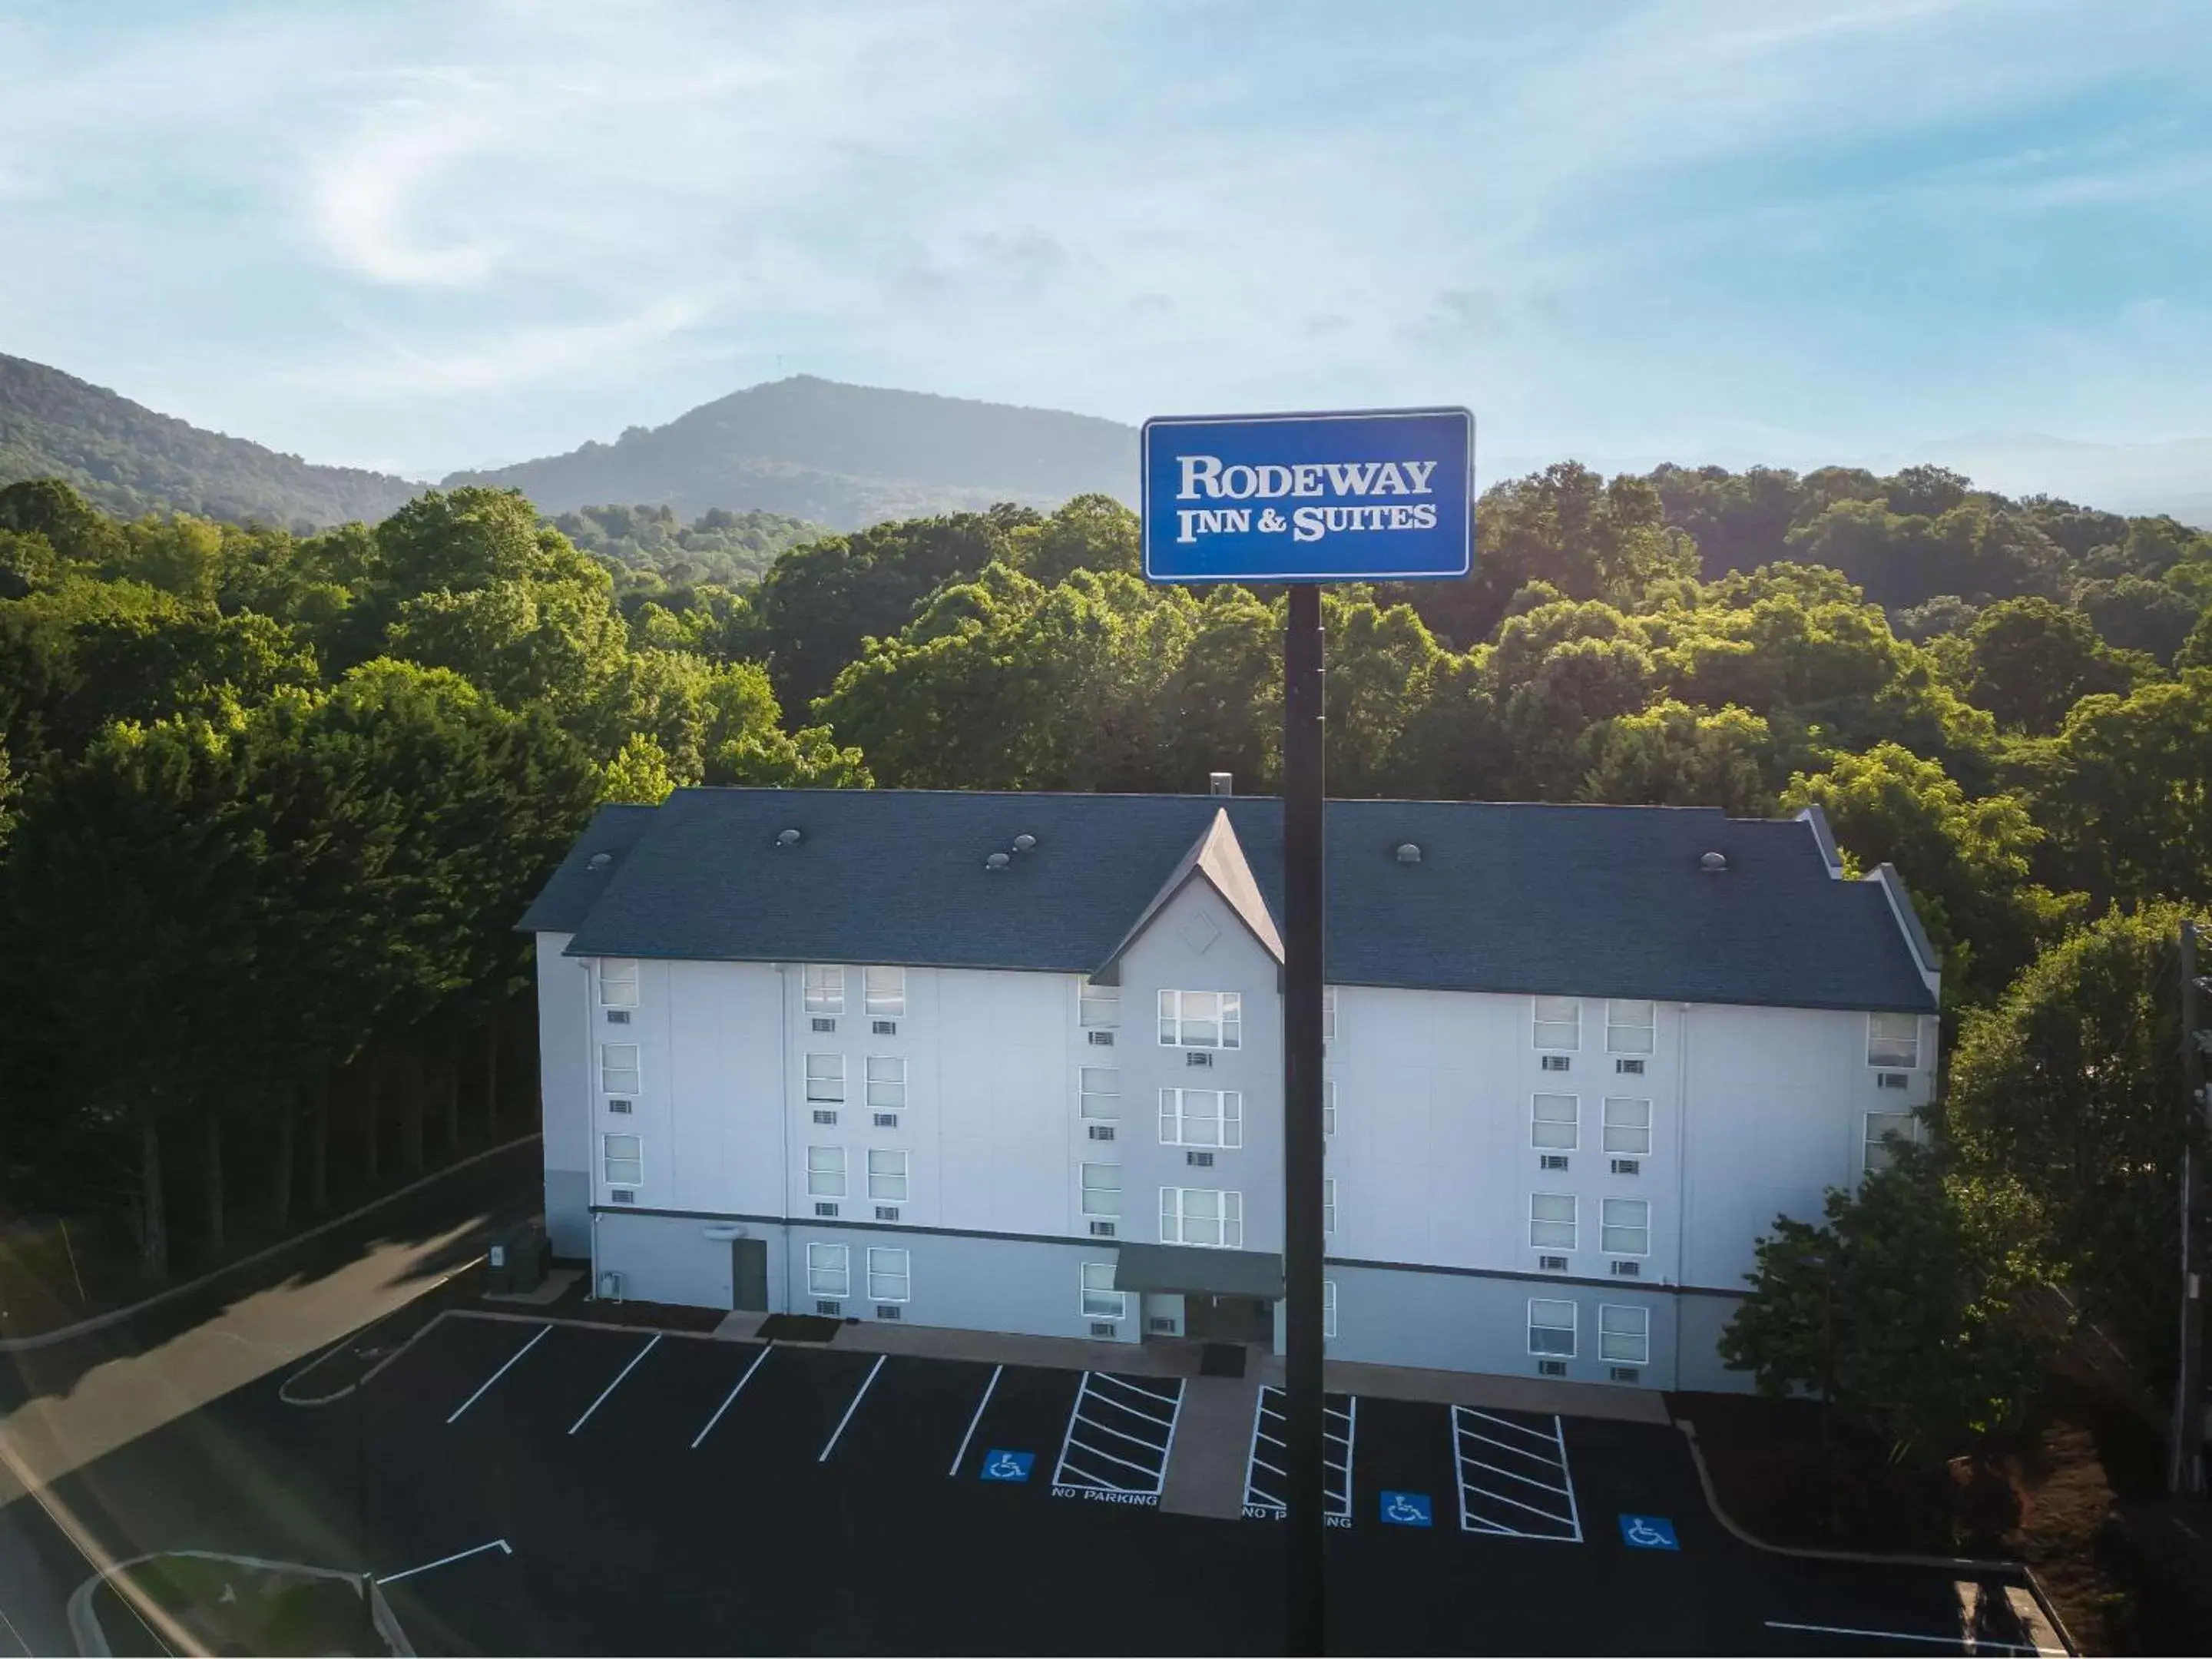 Property building in Rodeway Inn & Suites near Outlet Mall - Asheville